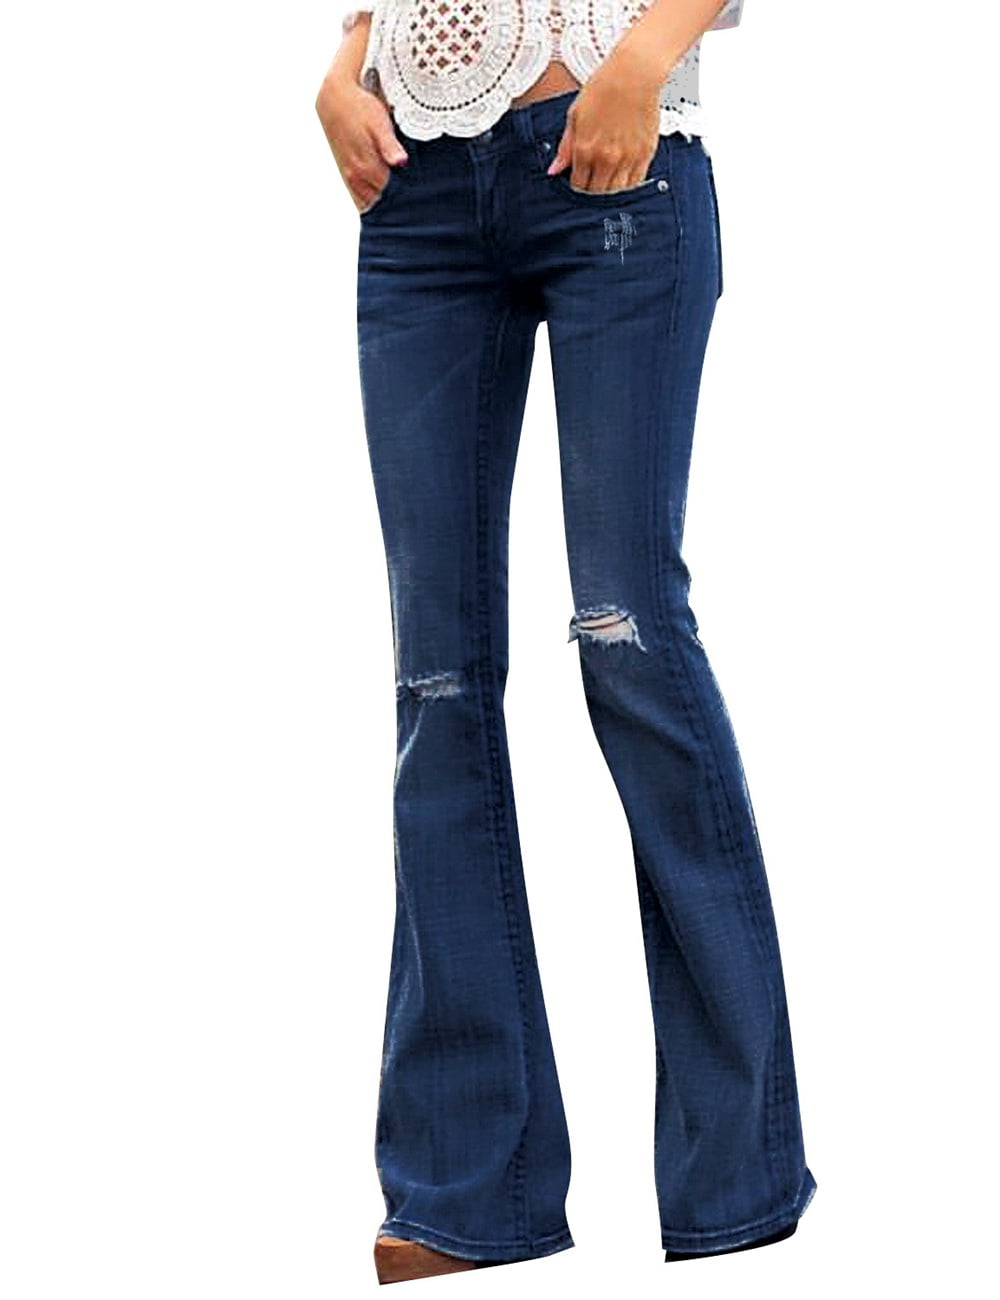 luvamia Womens Mid Rise Flare Bell Bottom Jeans Ripped Wide Leg Denim ...